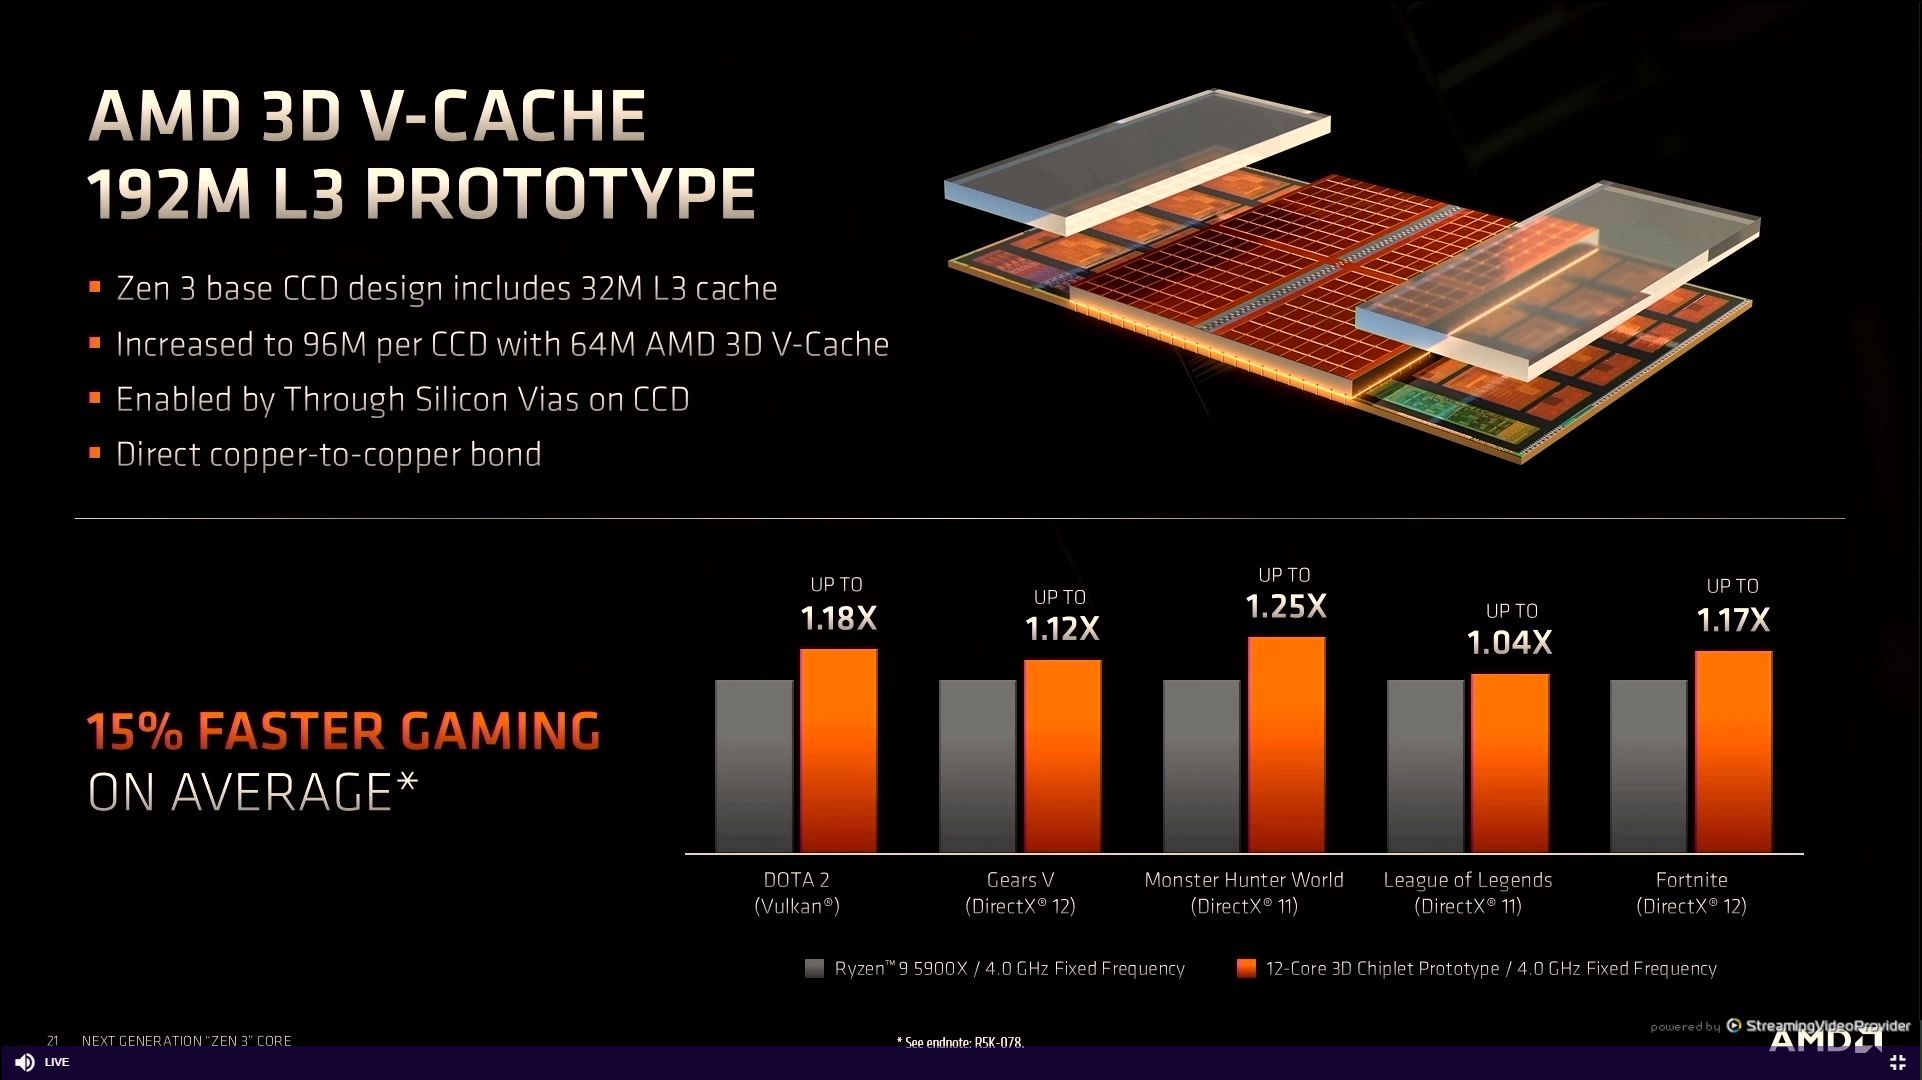 5 things you need to know about AMD's new Ryzen 7 5800X3D processor